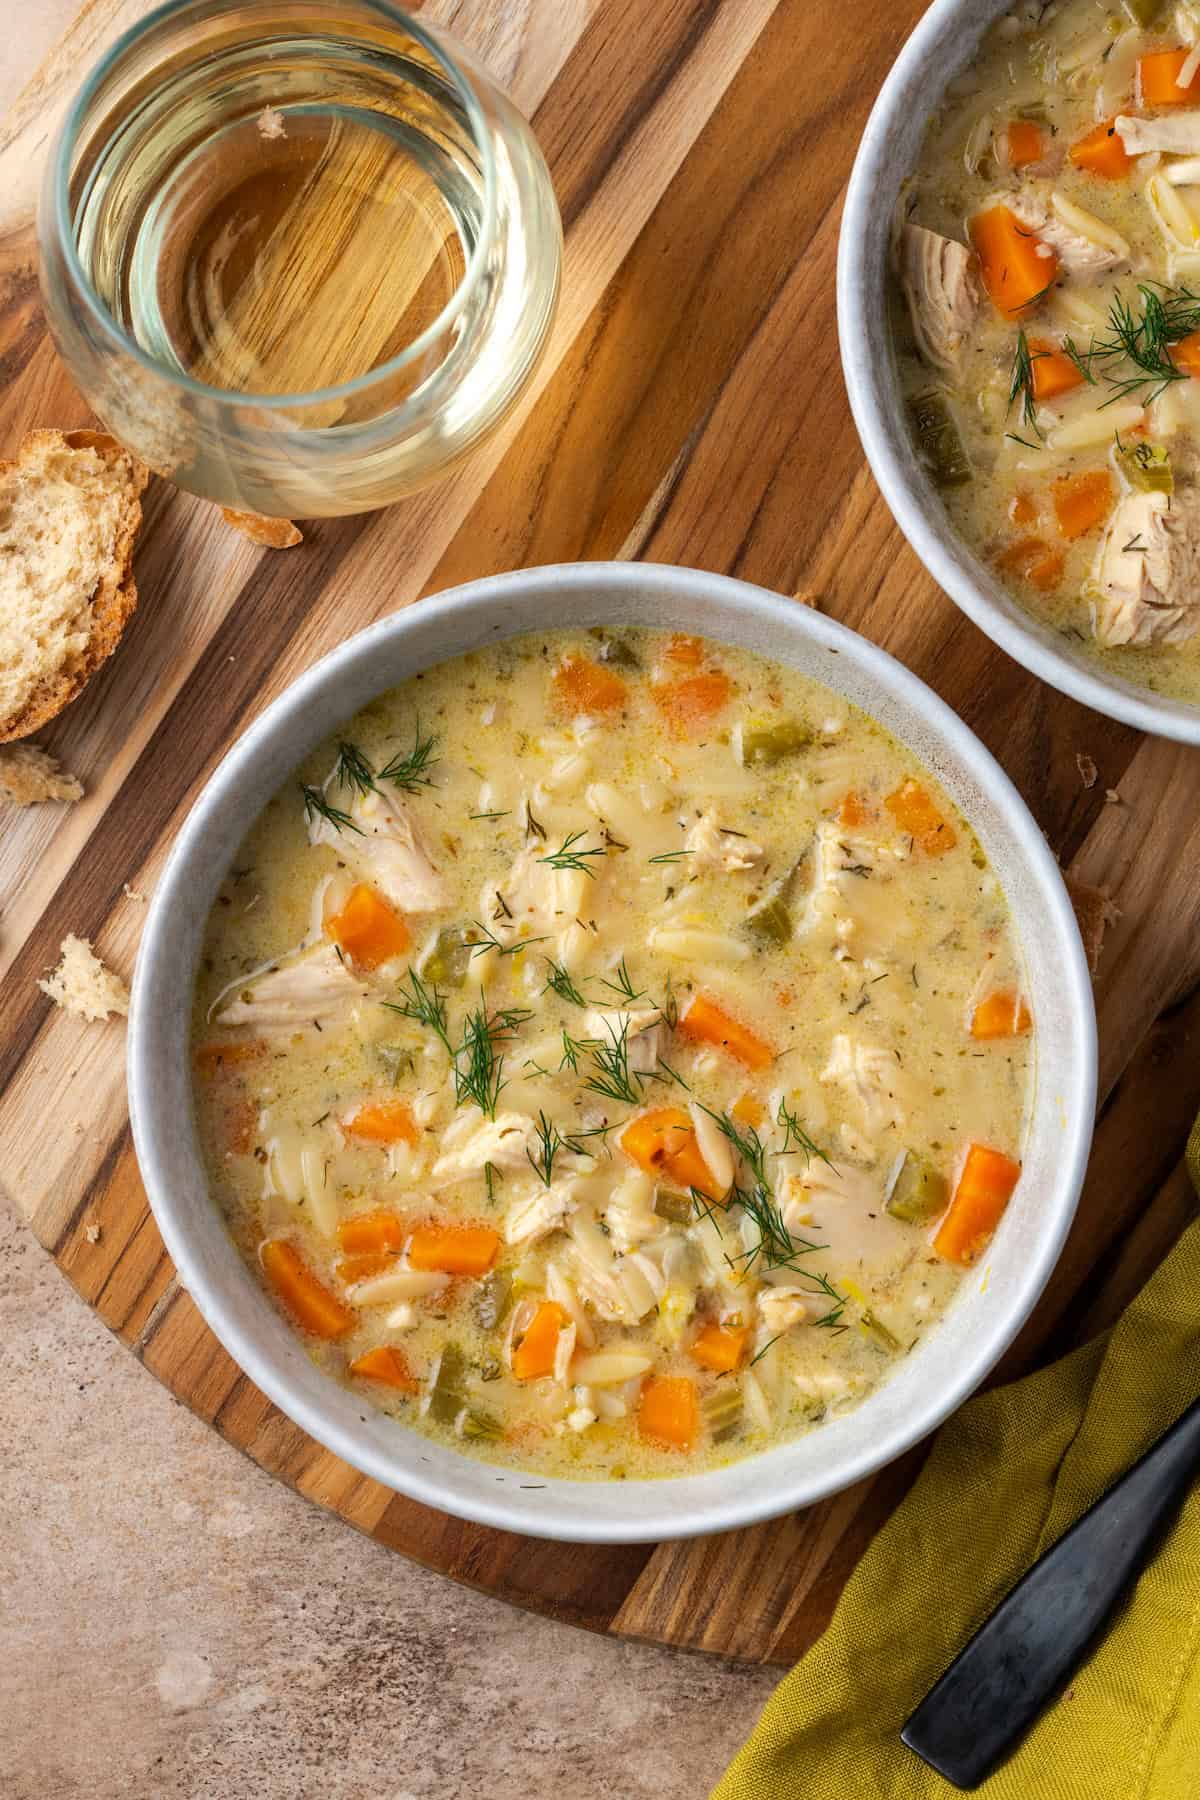 Overhead view of a bowl of lemon chicken orzo soup next to a stemless glass of white wine and a second bowl of soup.